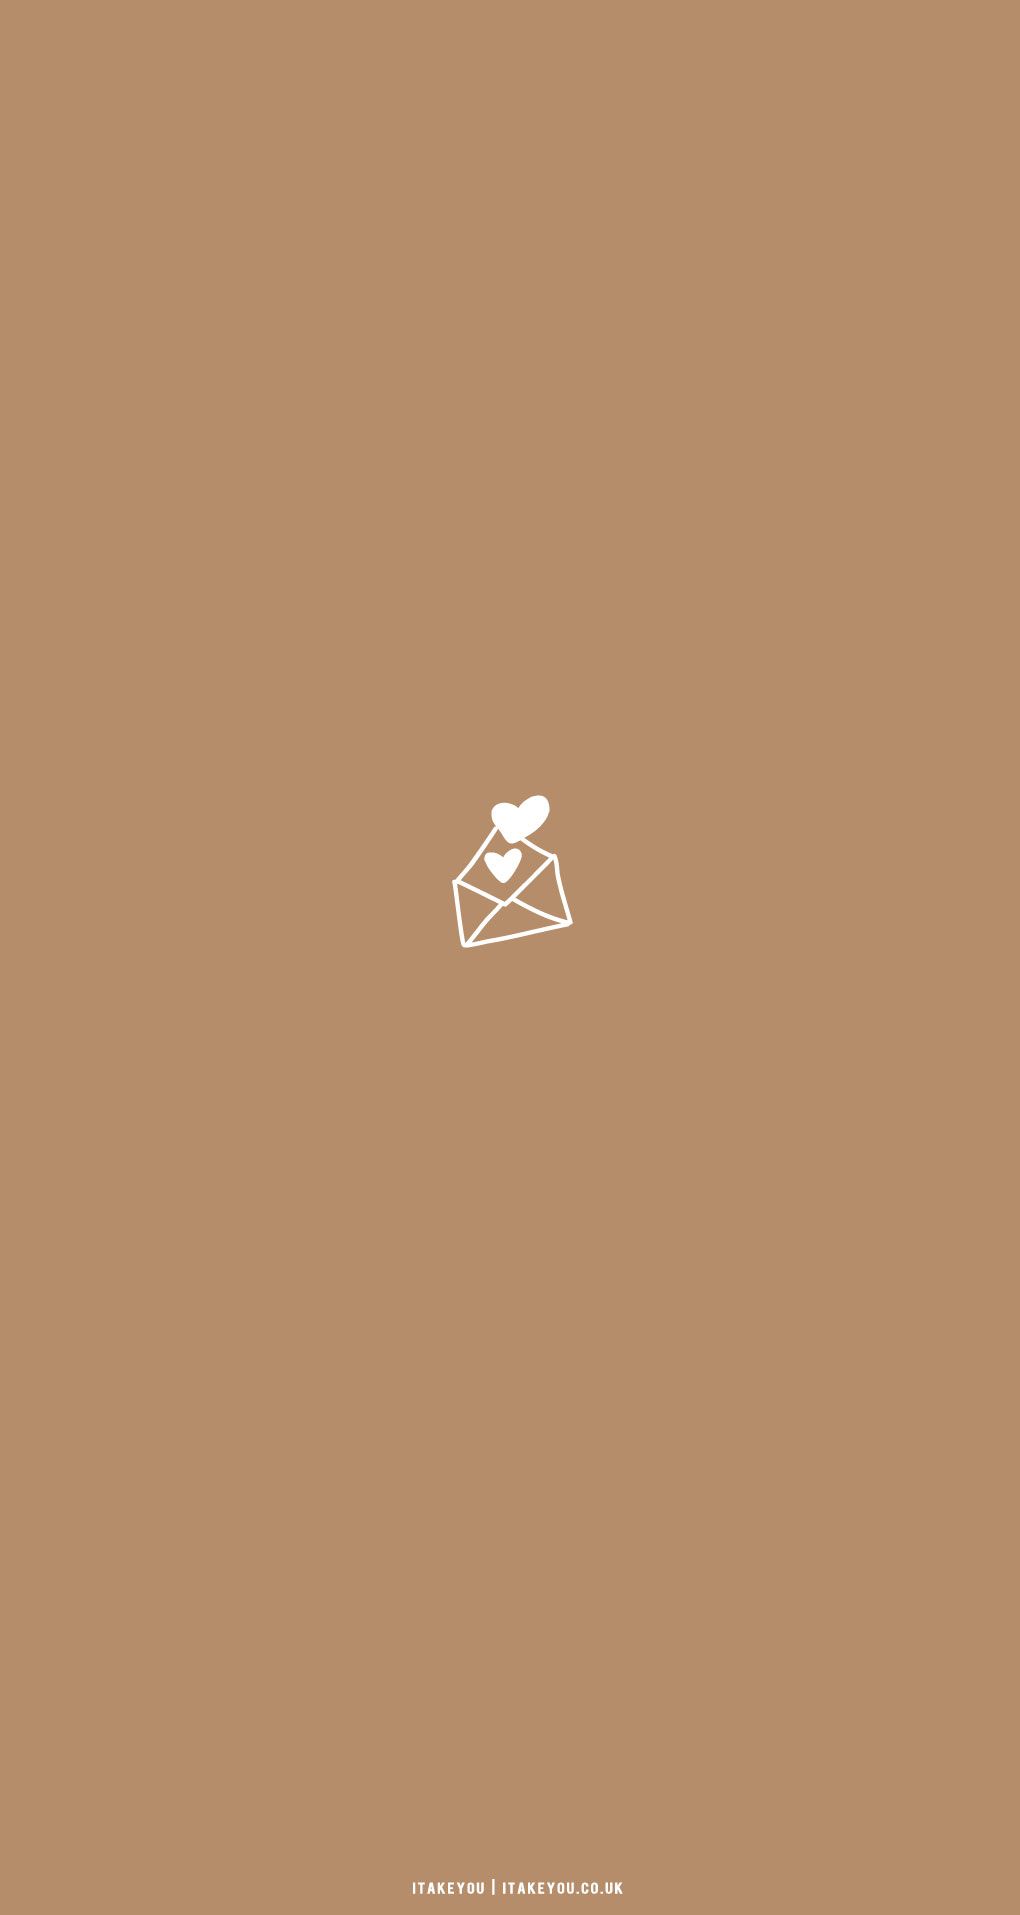 Cute Brown Aesthetic Wallpaper for Phone : Love Letter Background I Take You. Wedding Readings. Wedding Ideas